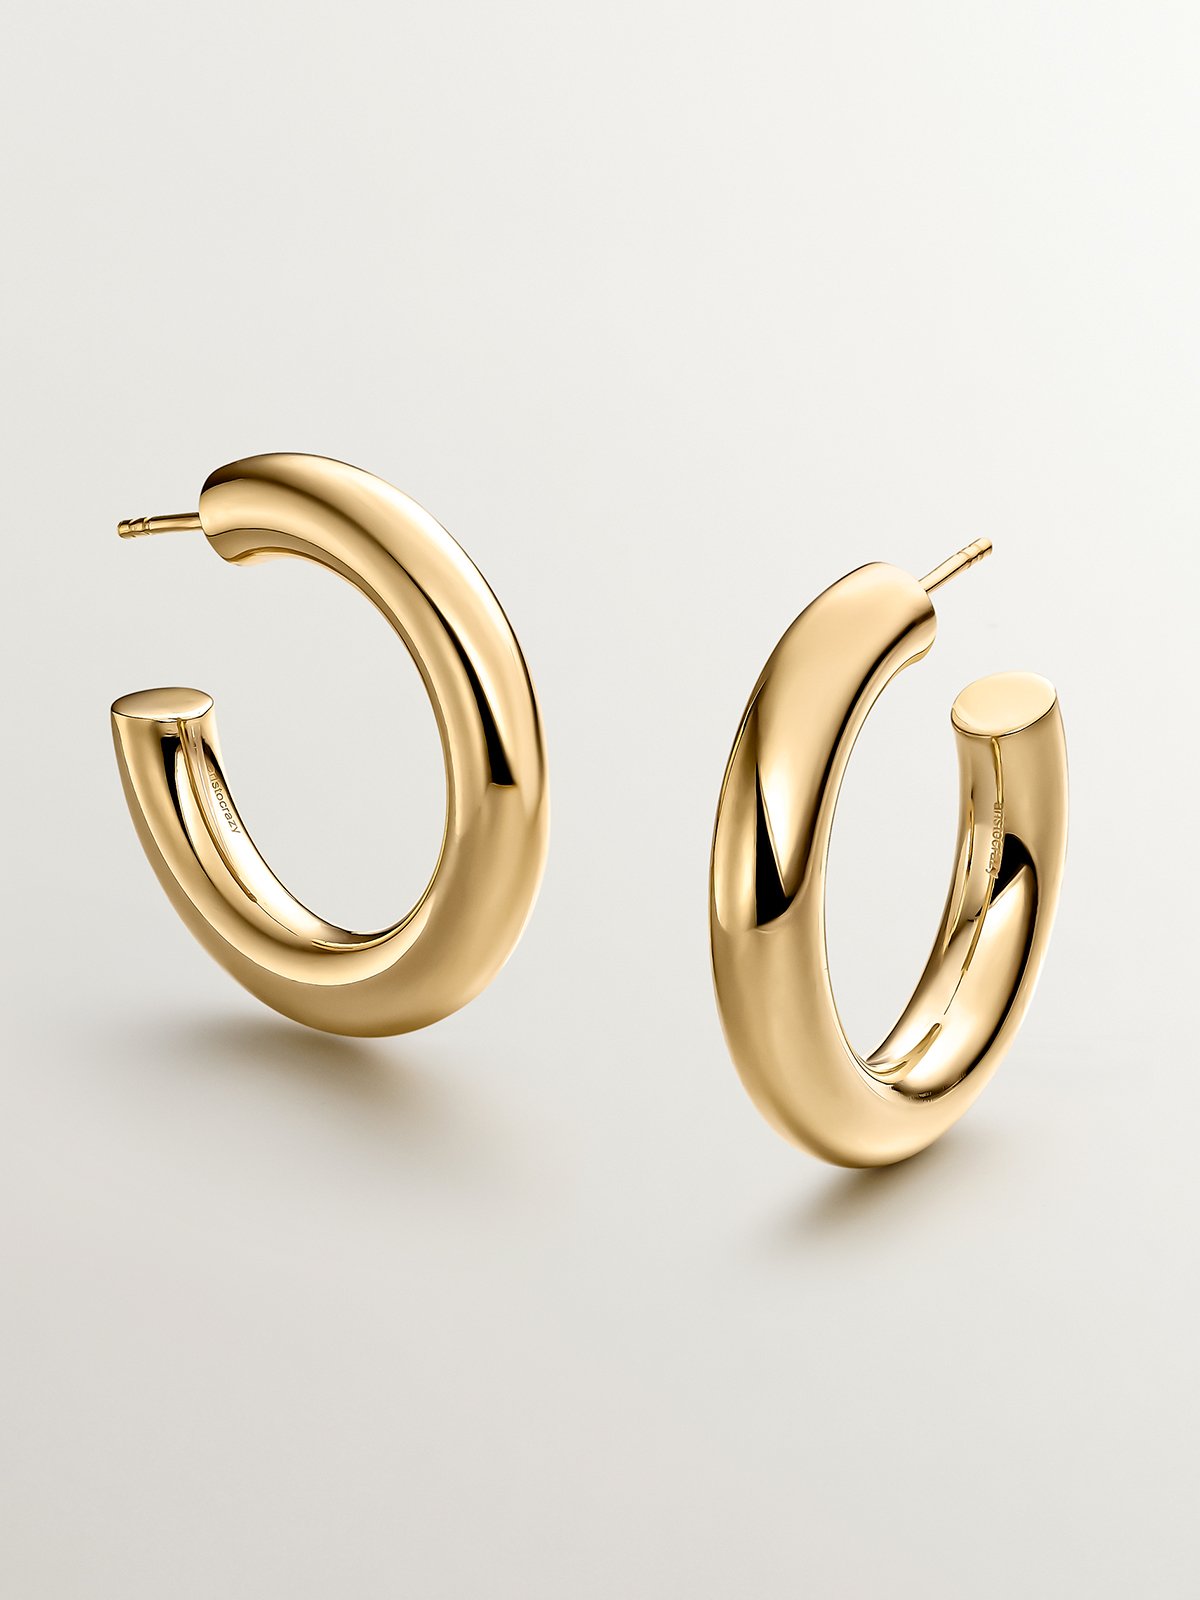 Thick hoop earrings made of 925 silver plated in 18K yellow gold